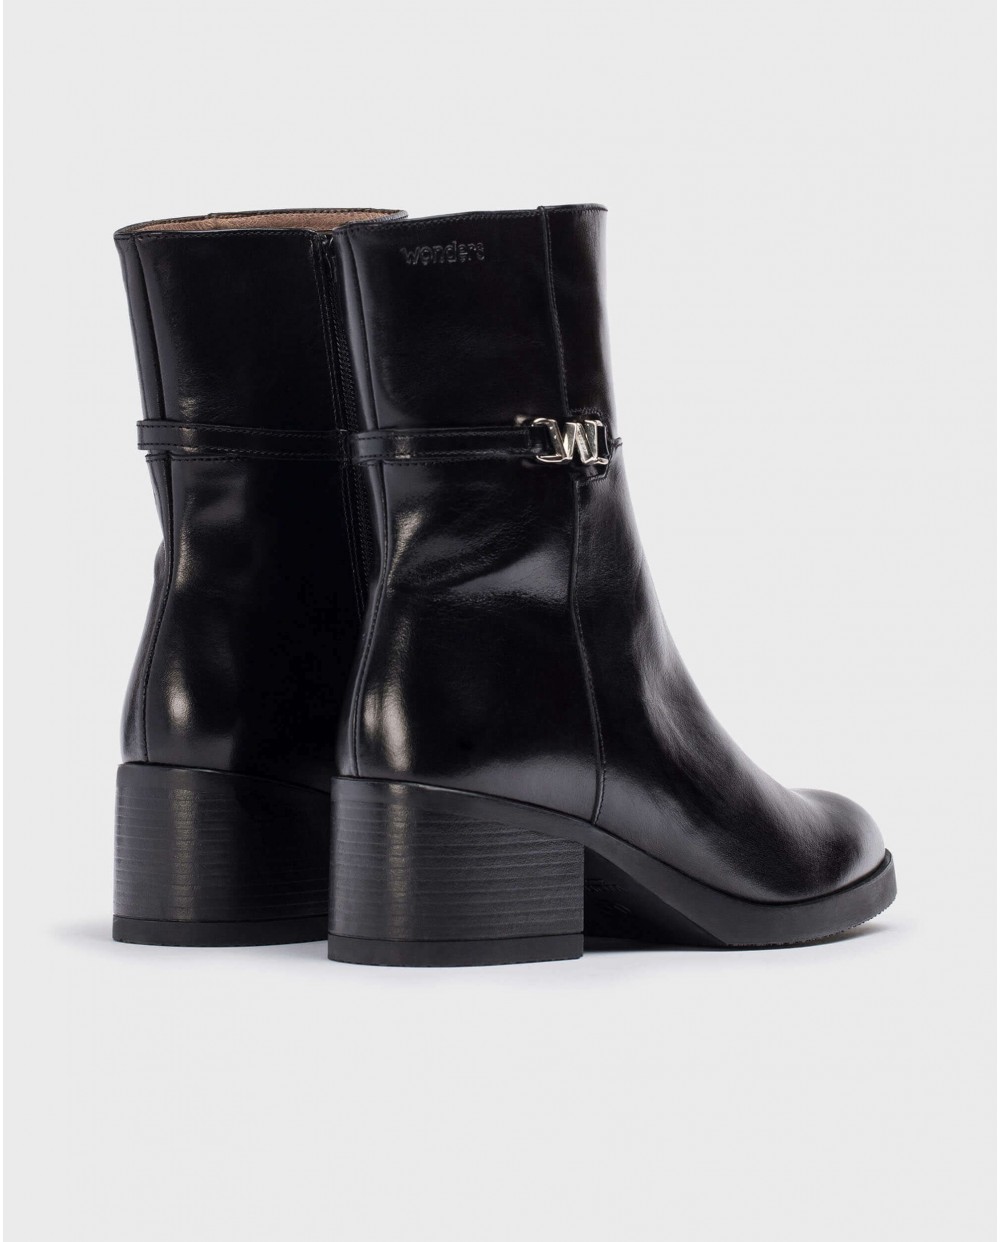 Wonders-Ankle Boots-Black DORA ankle boot